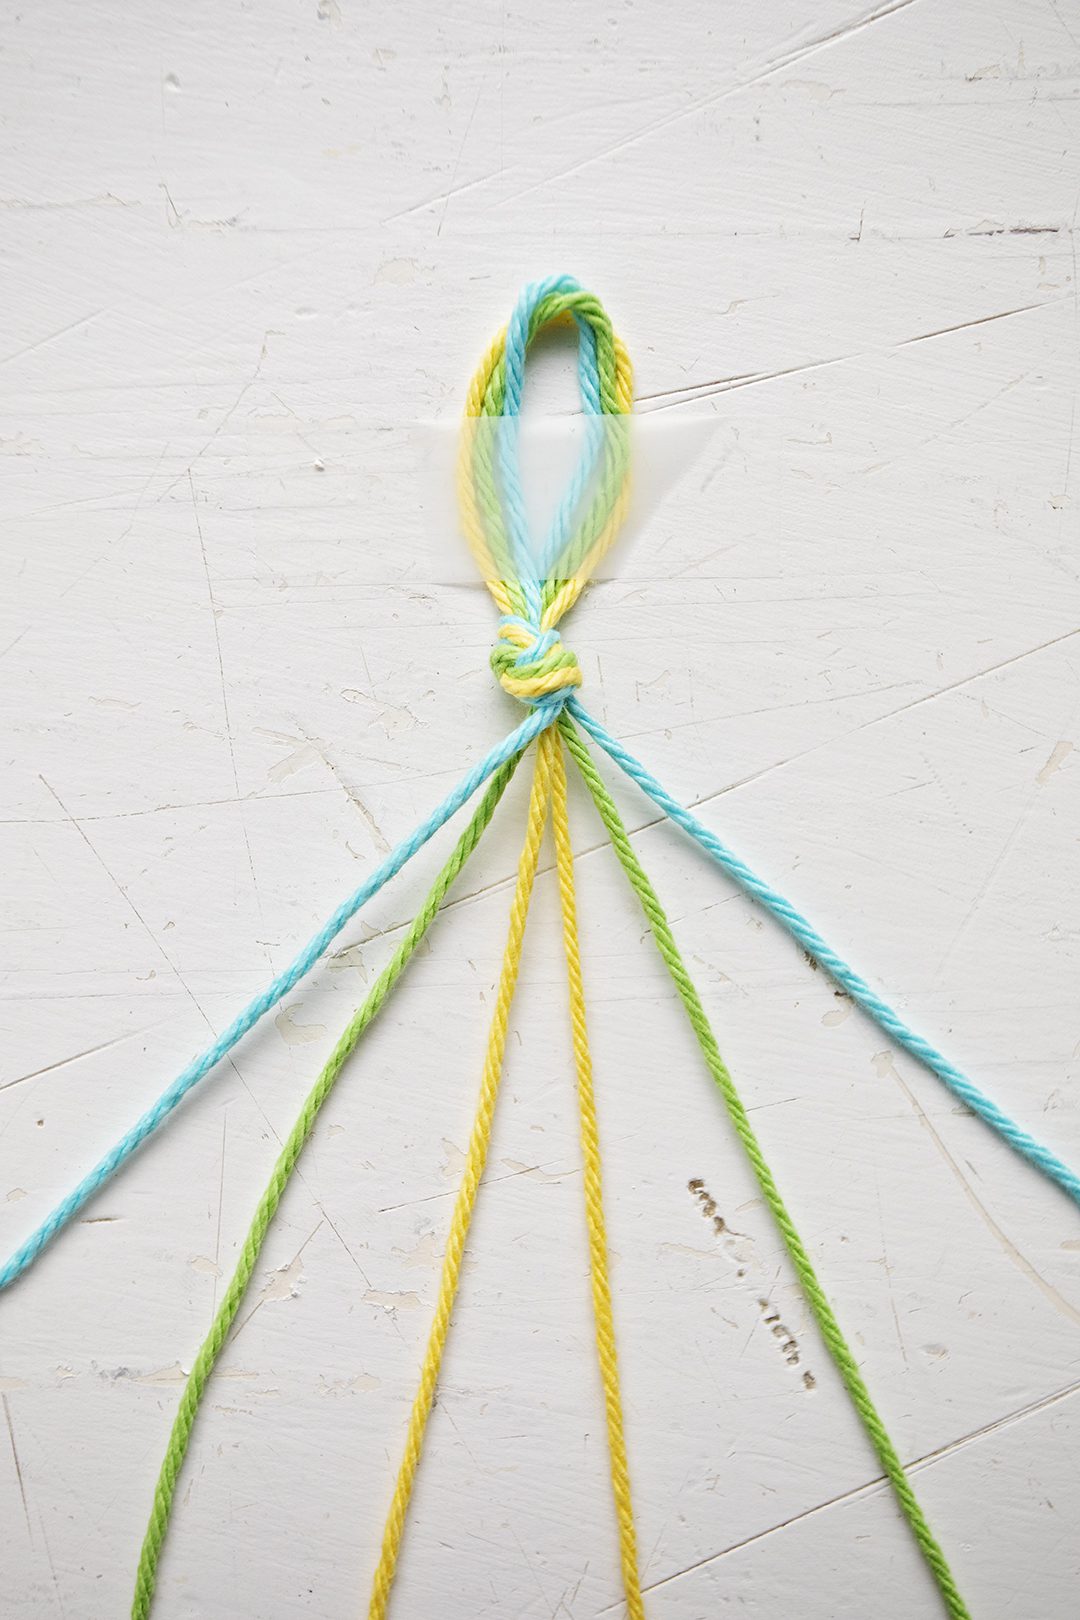 A chevron pattern bracelet being made from blue, green, and yellow string.